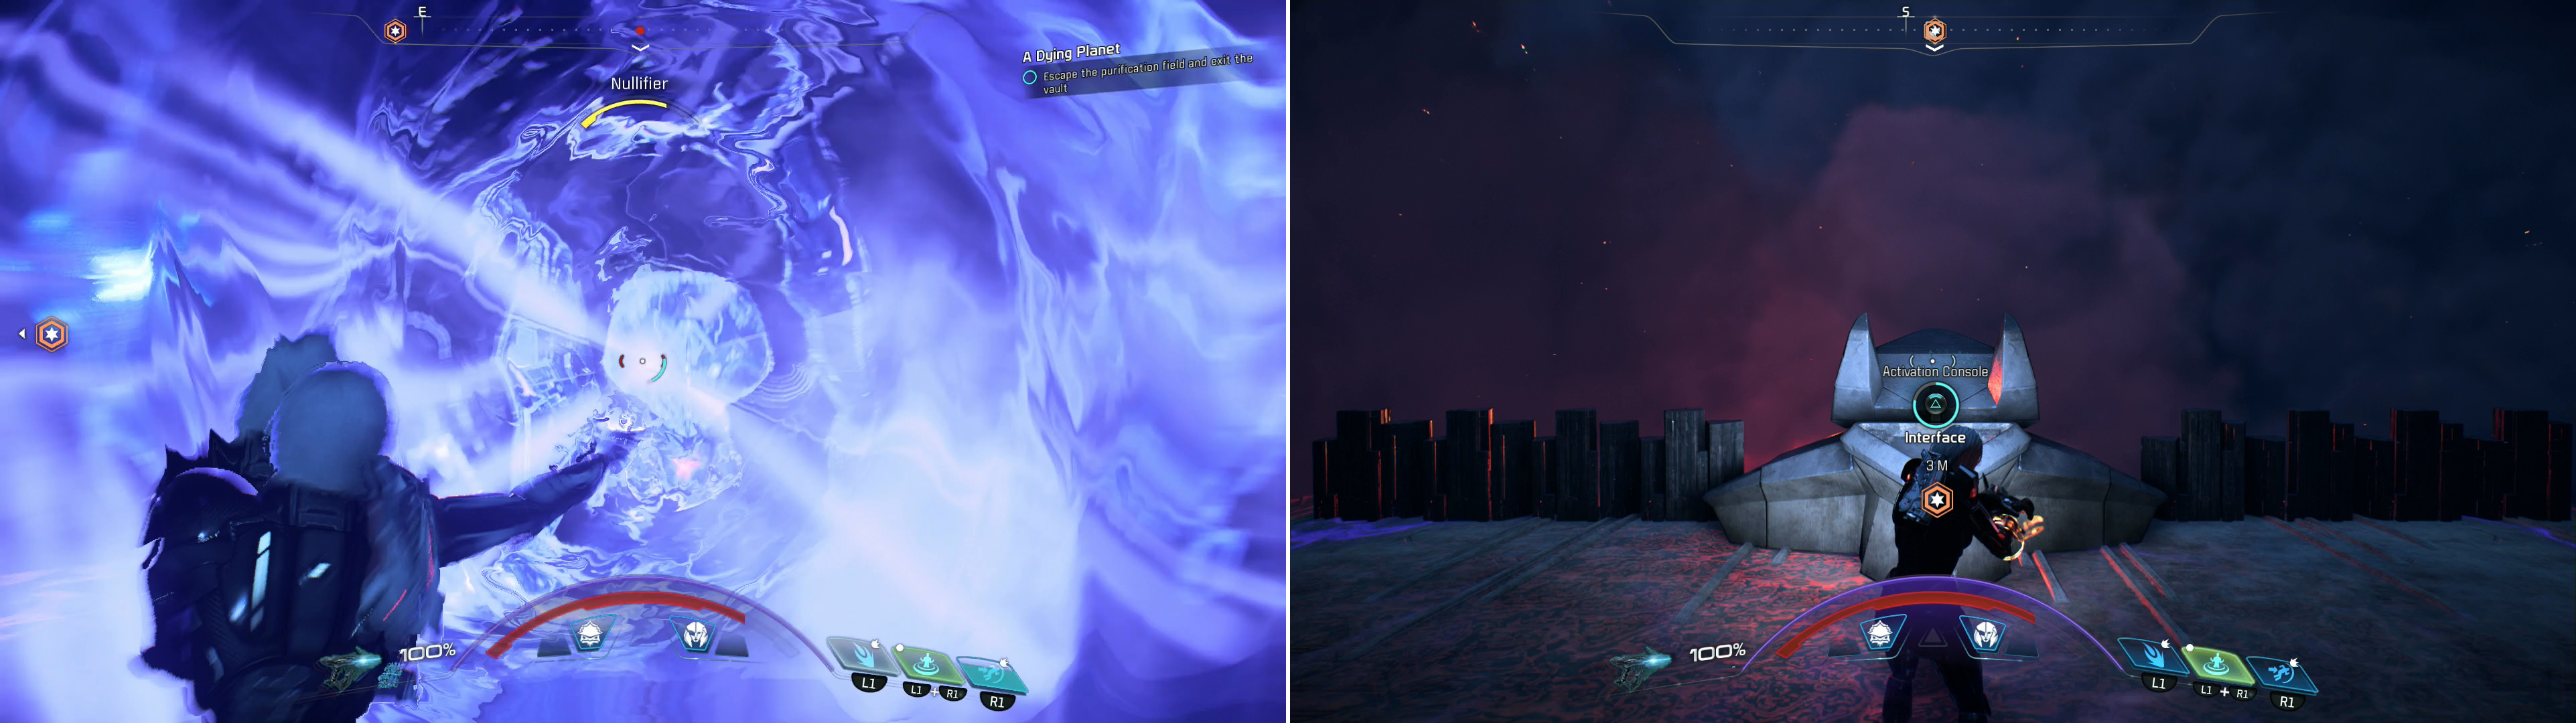 Fight your way through the Remnant that appear when the purification field activates (left) then close the doors to escape the field (right).